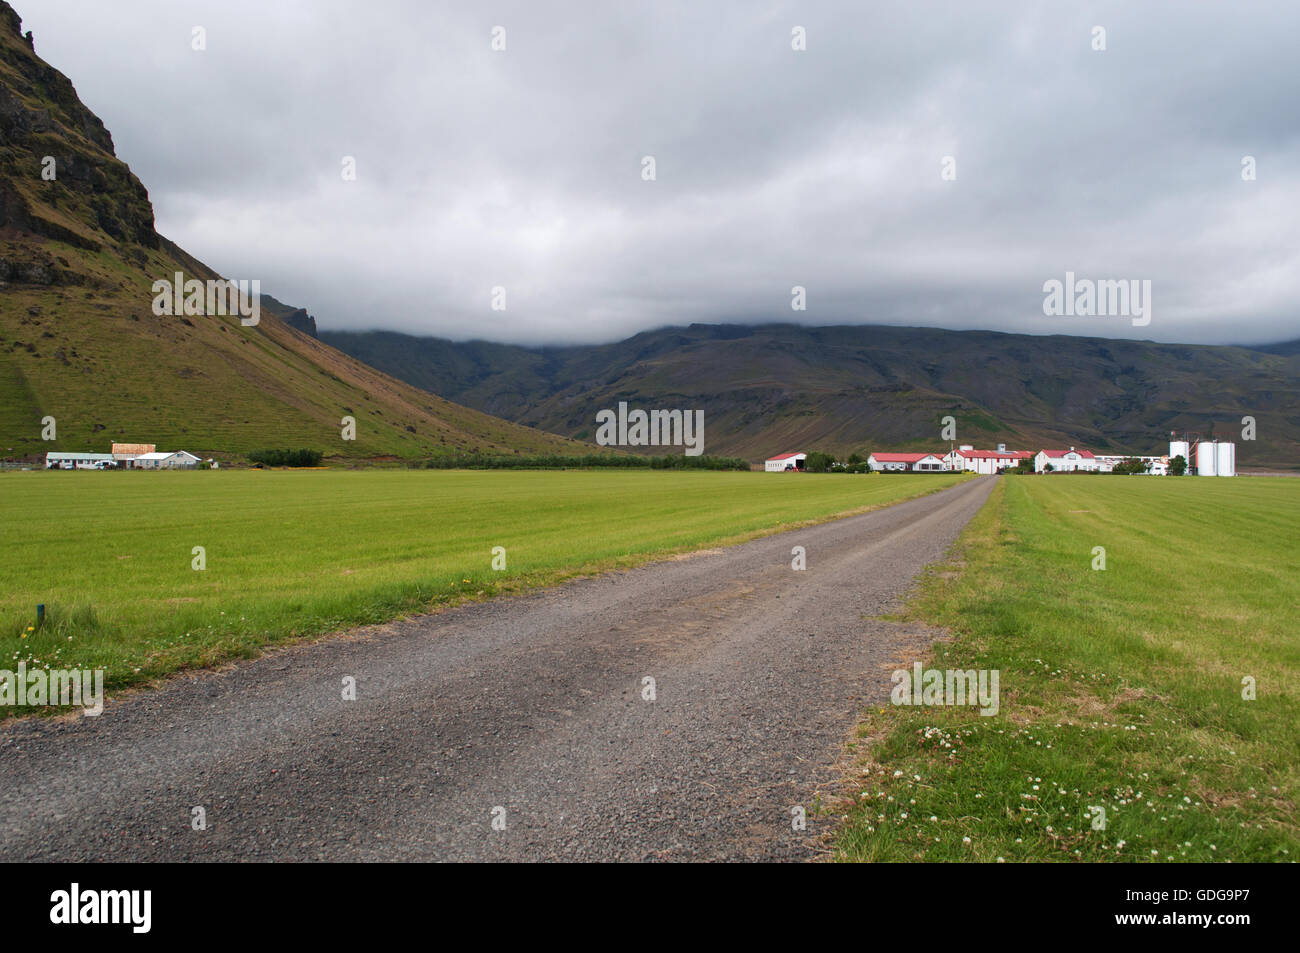 Iceland: houses under the volcano Eyjafjallajokull, whose 2010 eruption led to the closure of airspace from many Ue airports Stock Photo